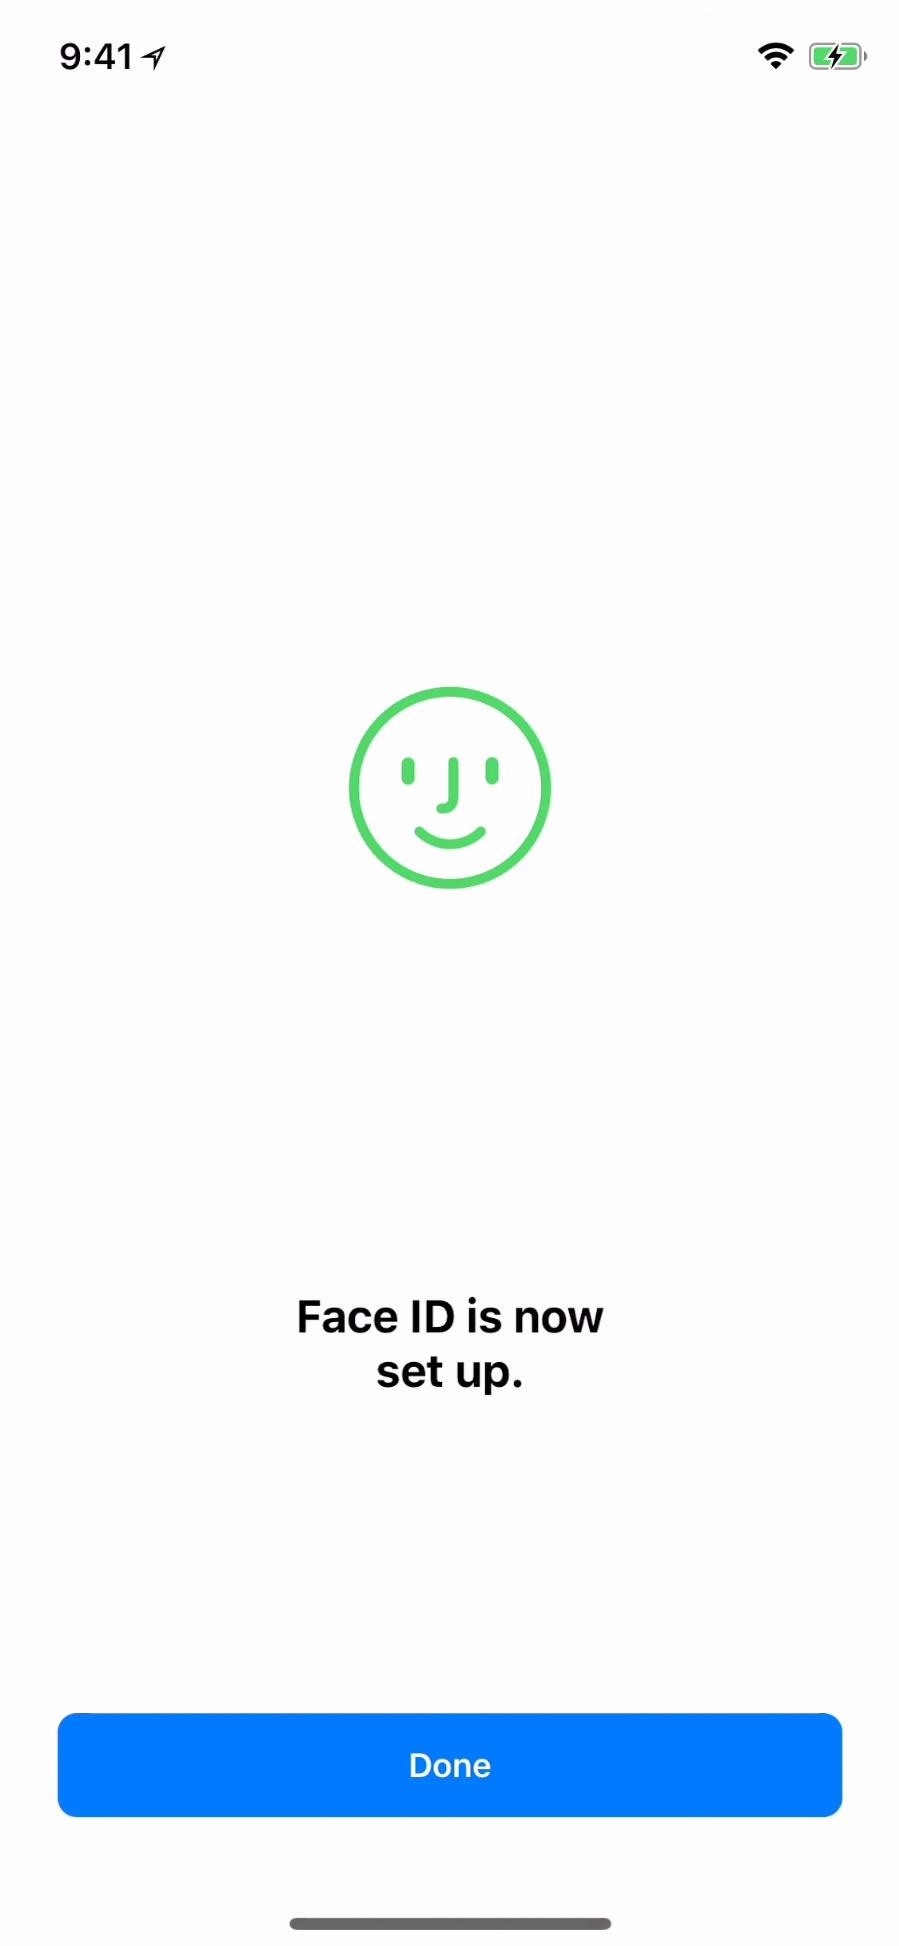 How to Register a Second Face ID Look on Your iPhone in iOS 12